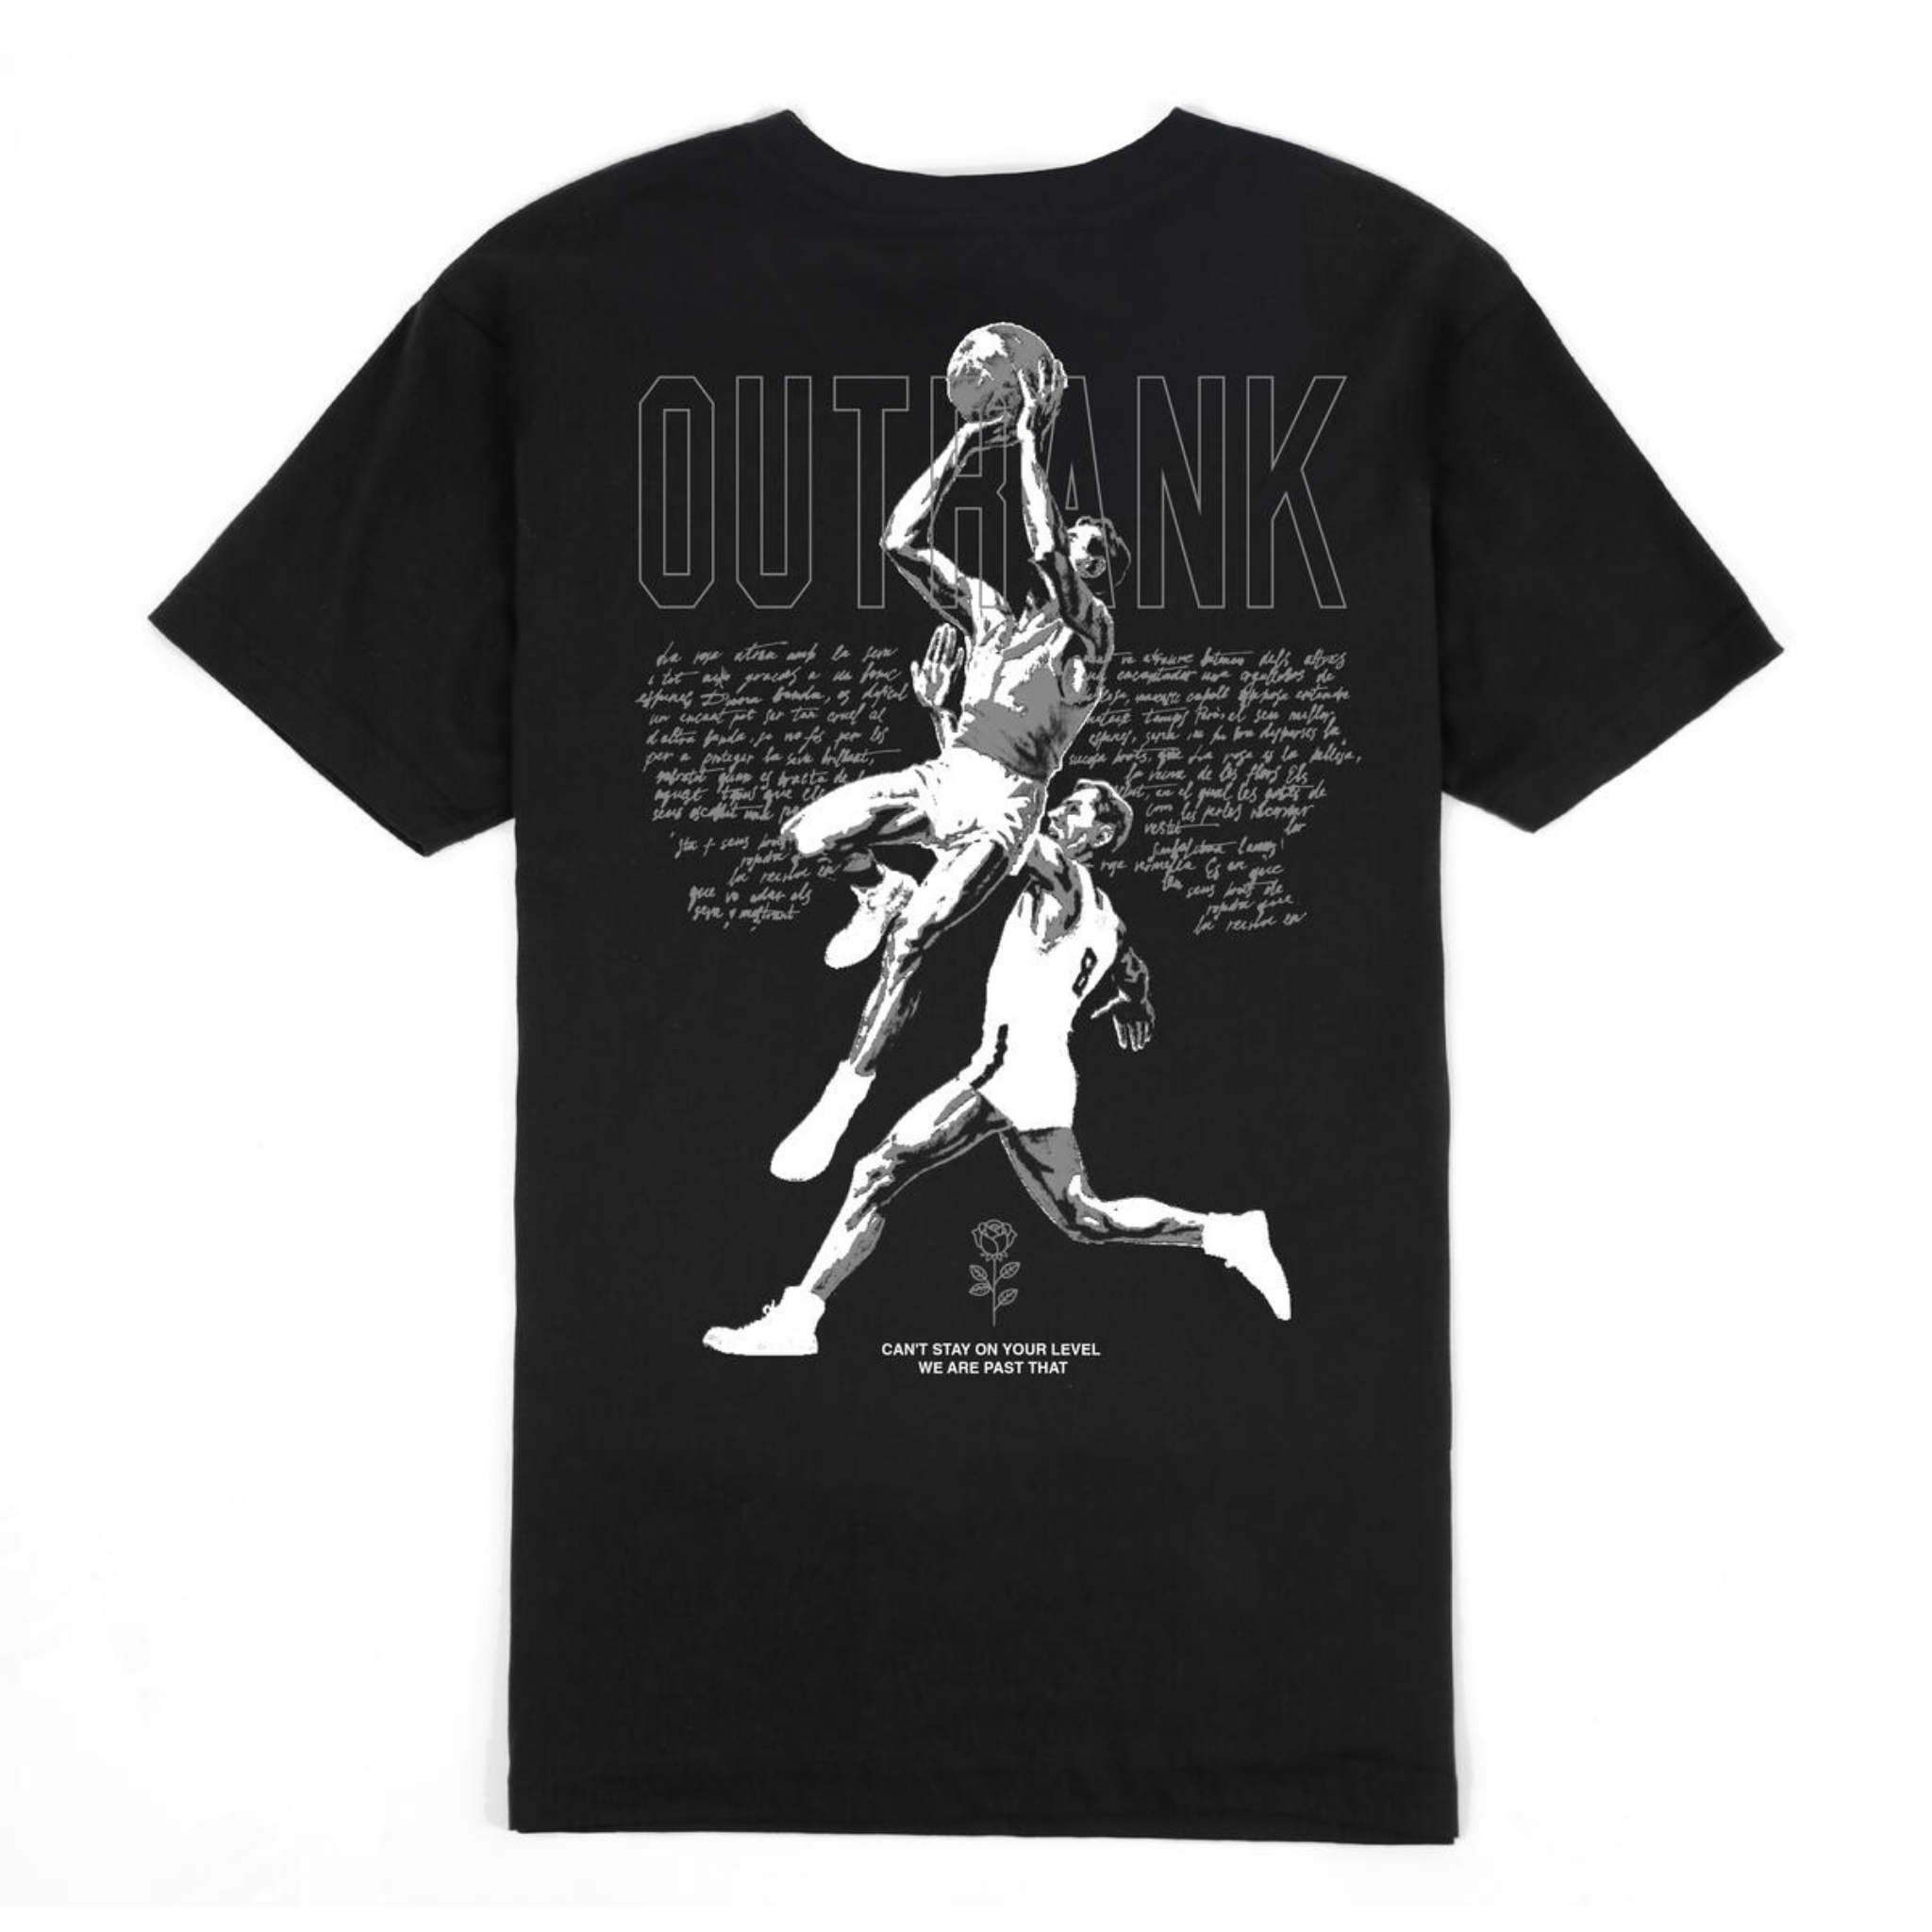 Outrank Can't Stay On Your Level T-Shirt (Black)